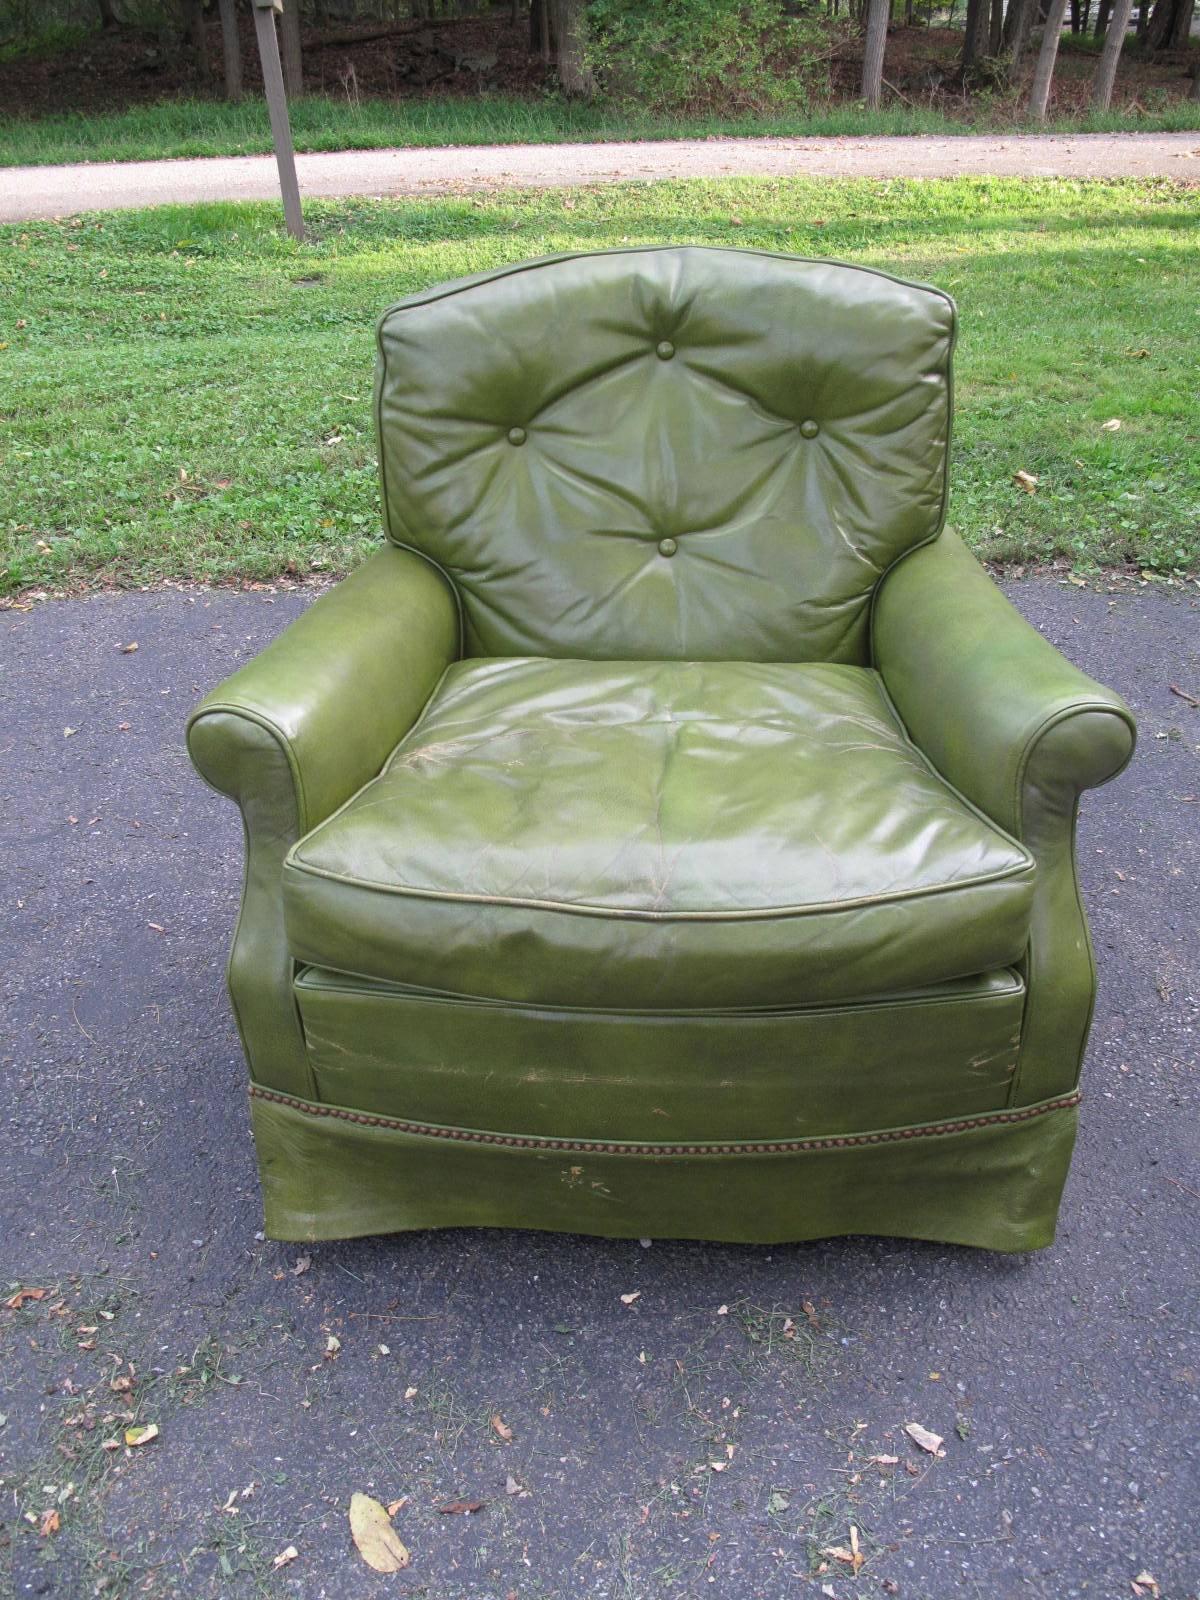 20th century American club chair by Baker Furniture. Tufted green leather. Skirted base with nailhead detail.